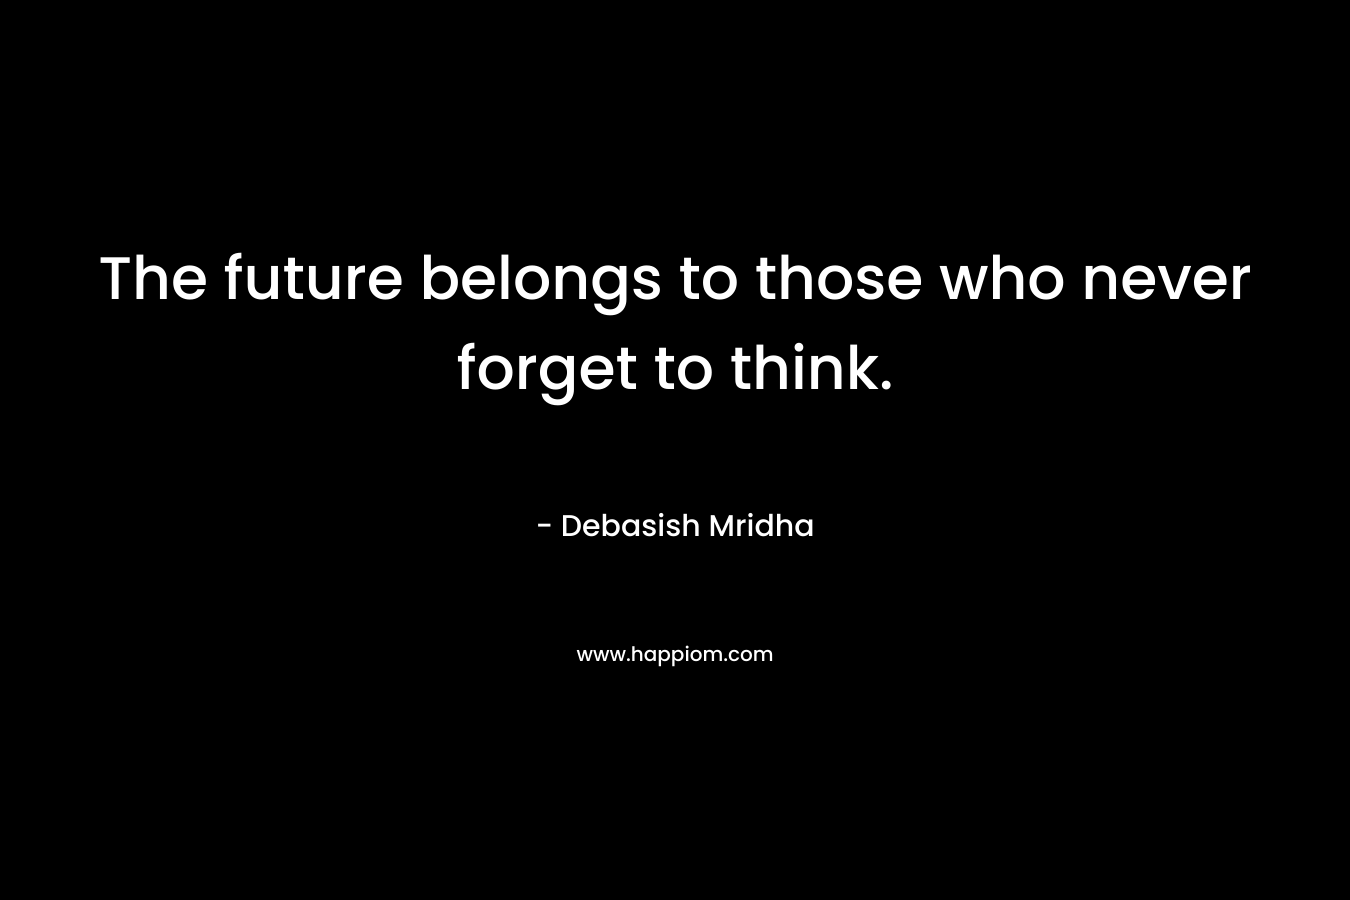 The future belongs to those who never forget to think.